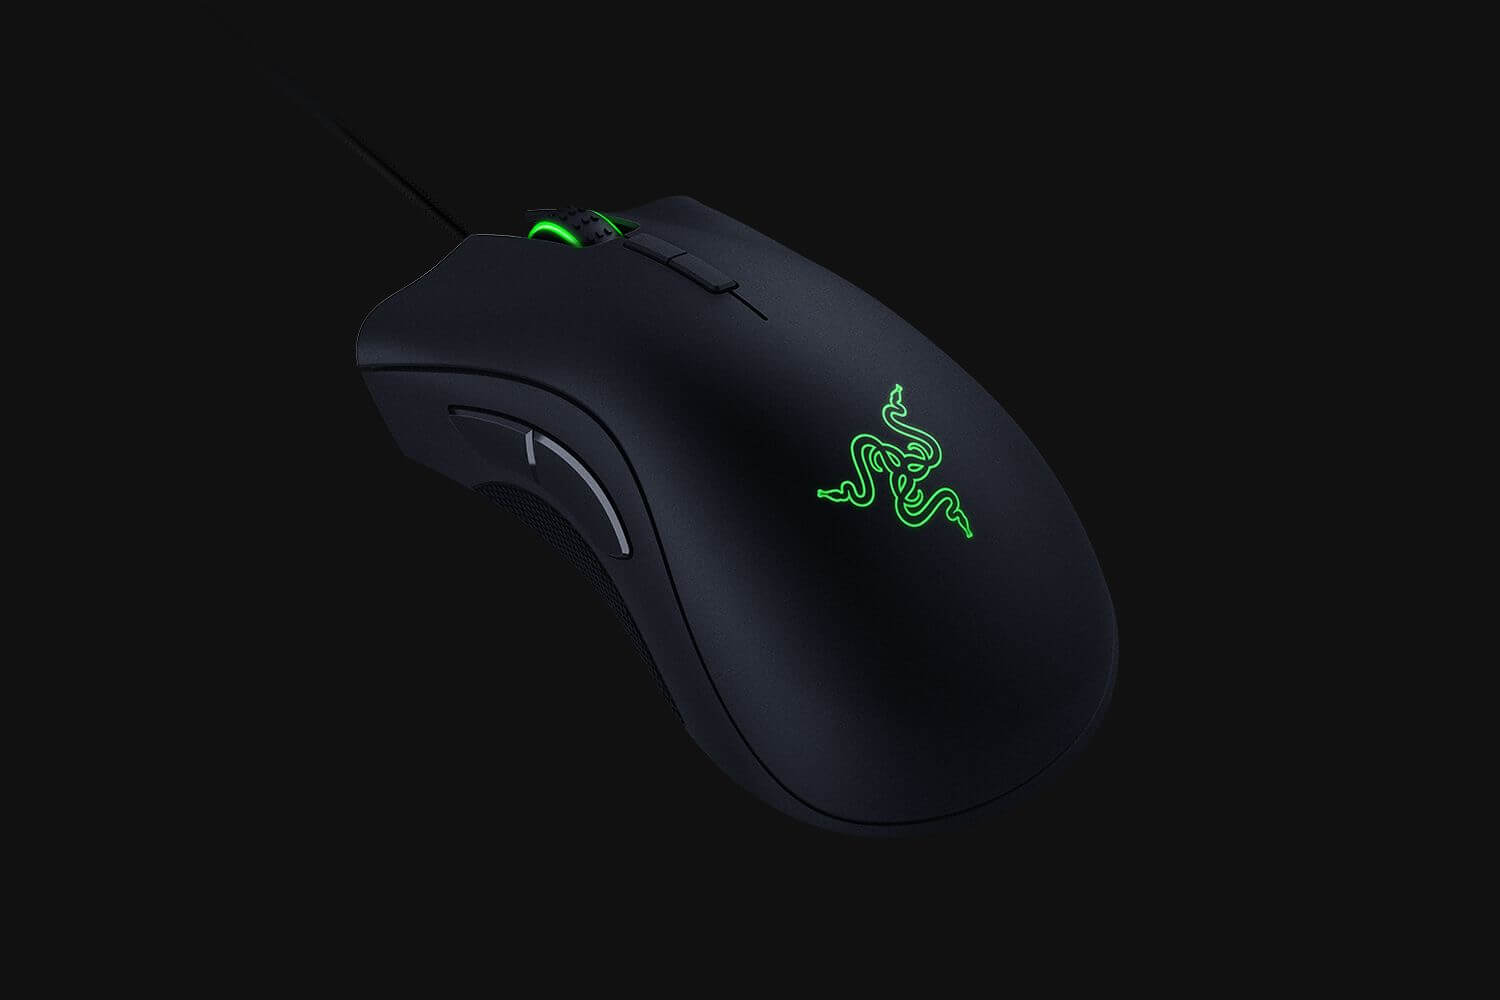 Get Your Razer DeathAdder Gaming Mouse Now As Amazon Prime Day Offers Huge Discount For Two Variants